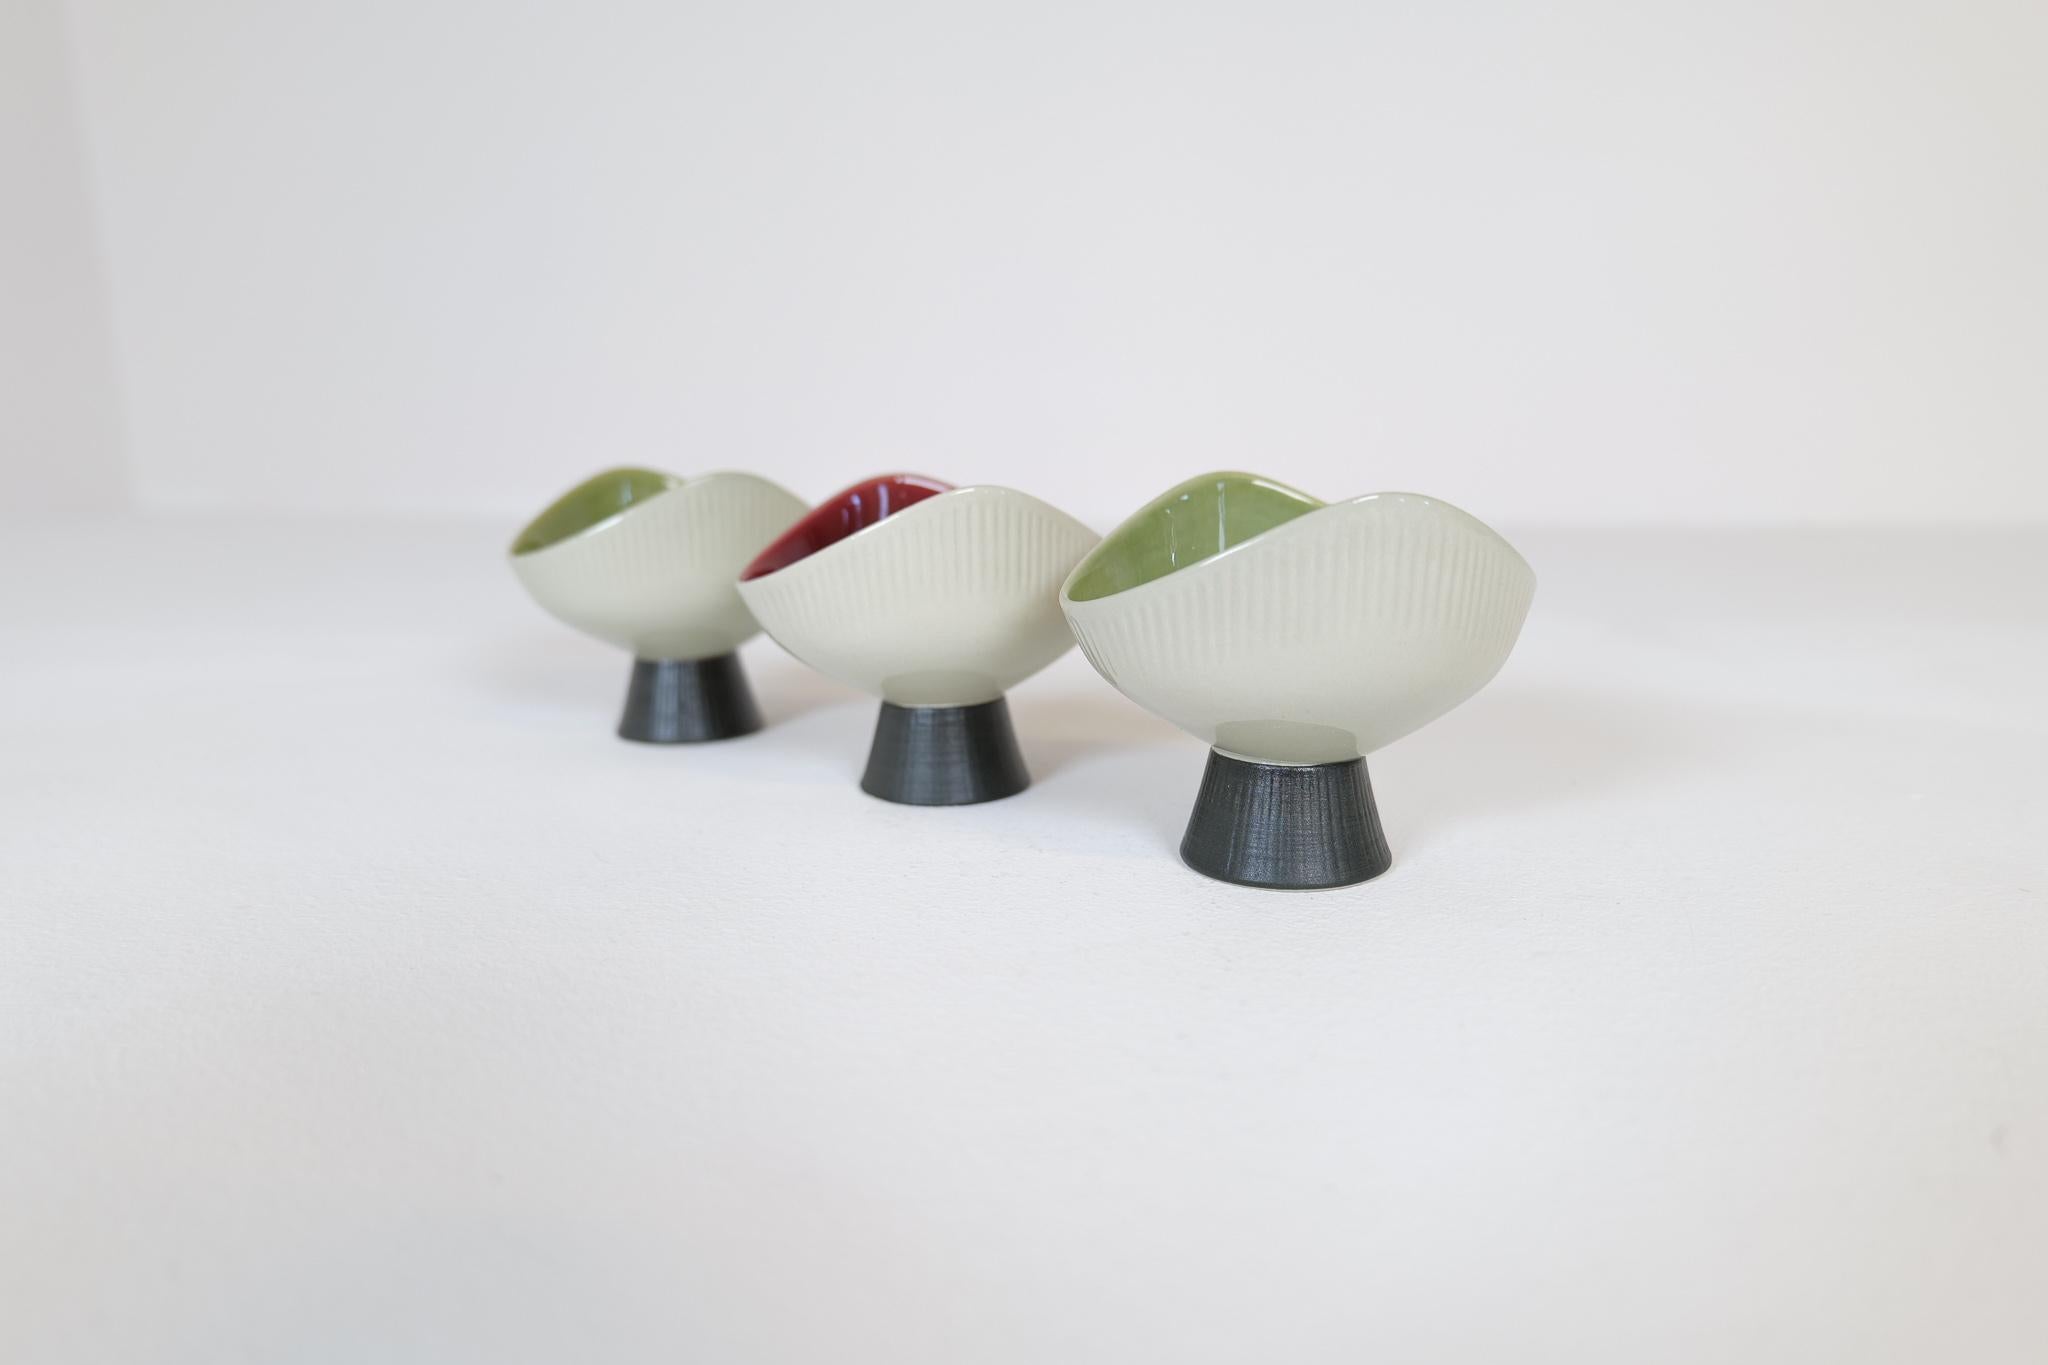 These small bowls produced in the 1950s for Rörstrand Sweden and designed by Carl-Harry Stålhane. 
With the name Bahia this bowls was created to be an exotic edition to the Scandinavian home in the 1950-60s.
The sleek form with its rounded base